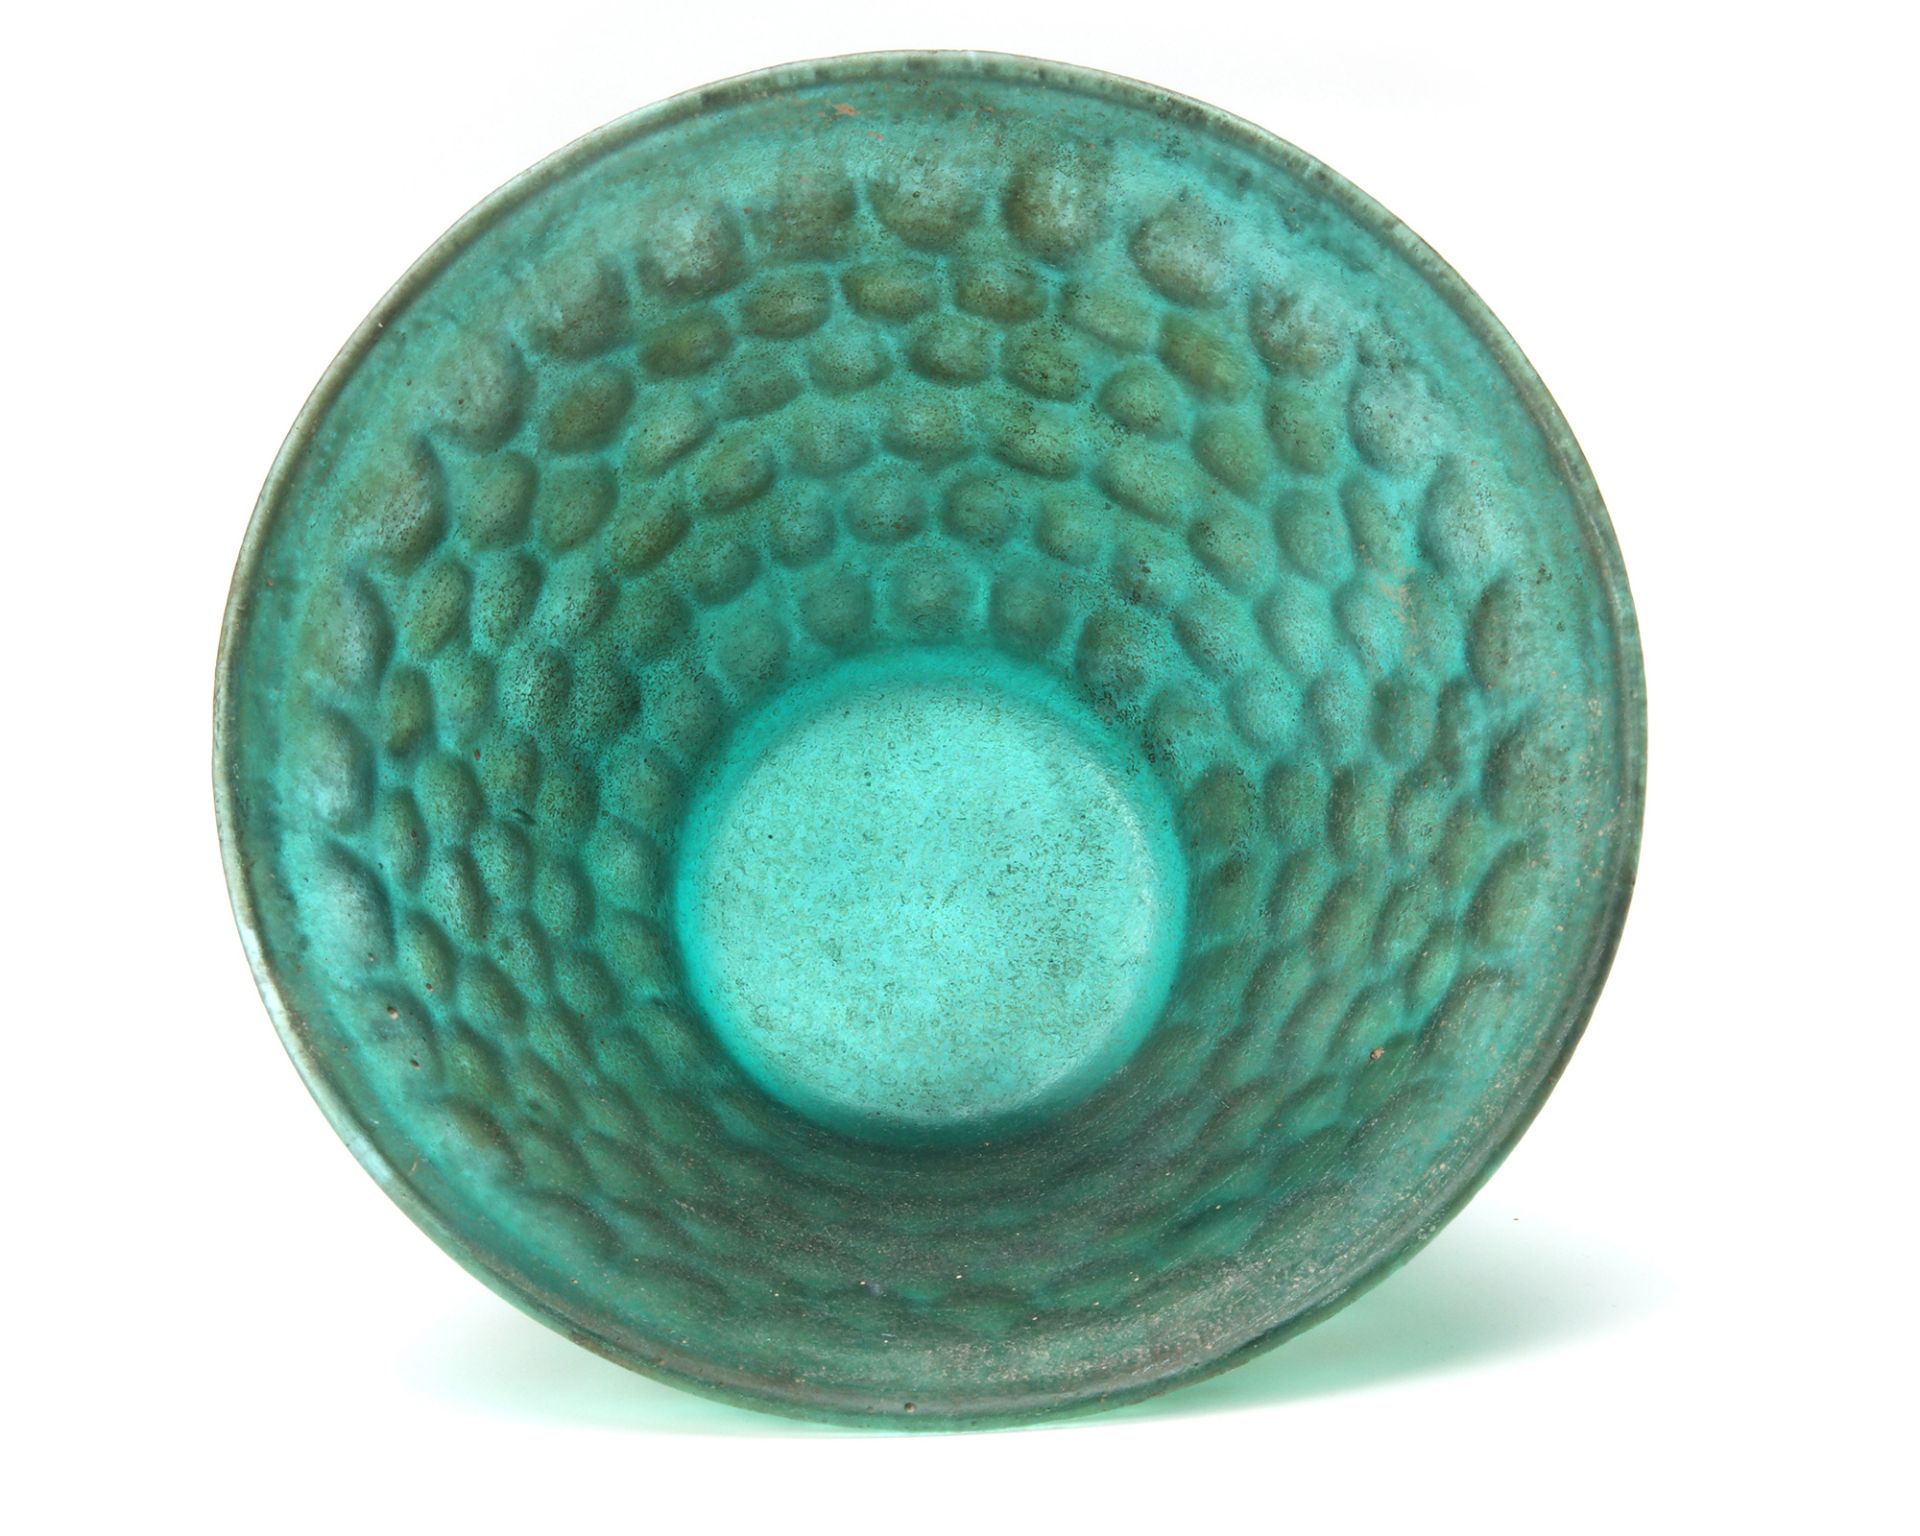 A PERSIAN GREEN CUT GLASS BOWL, 8TH-9TH CENTURY - Image 10 of 10